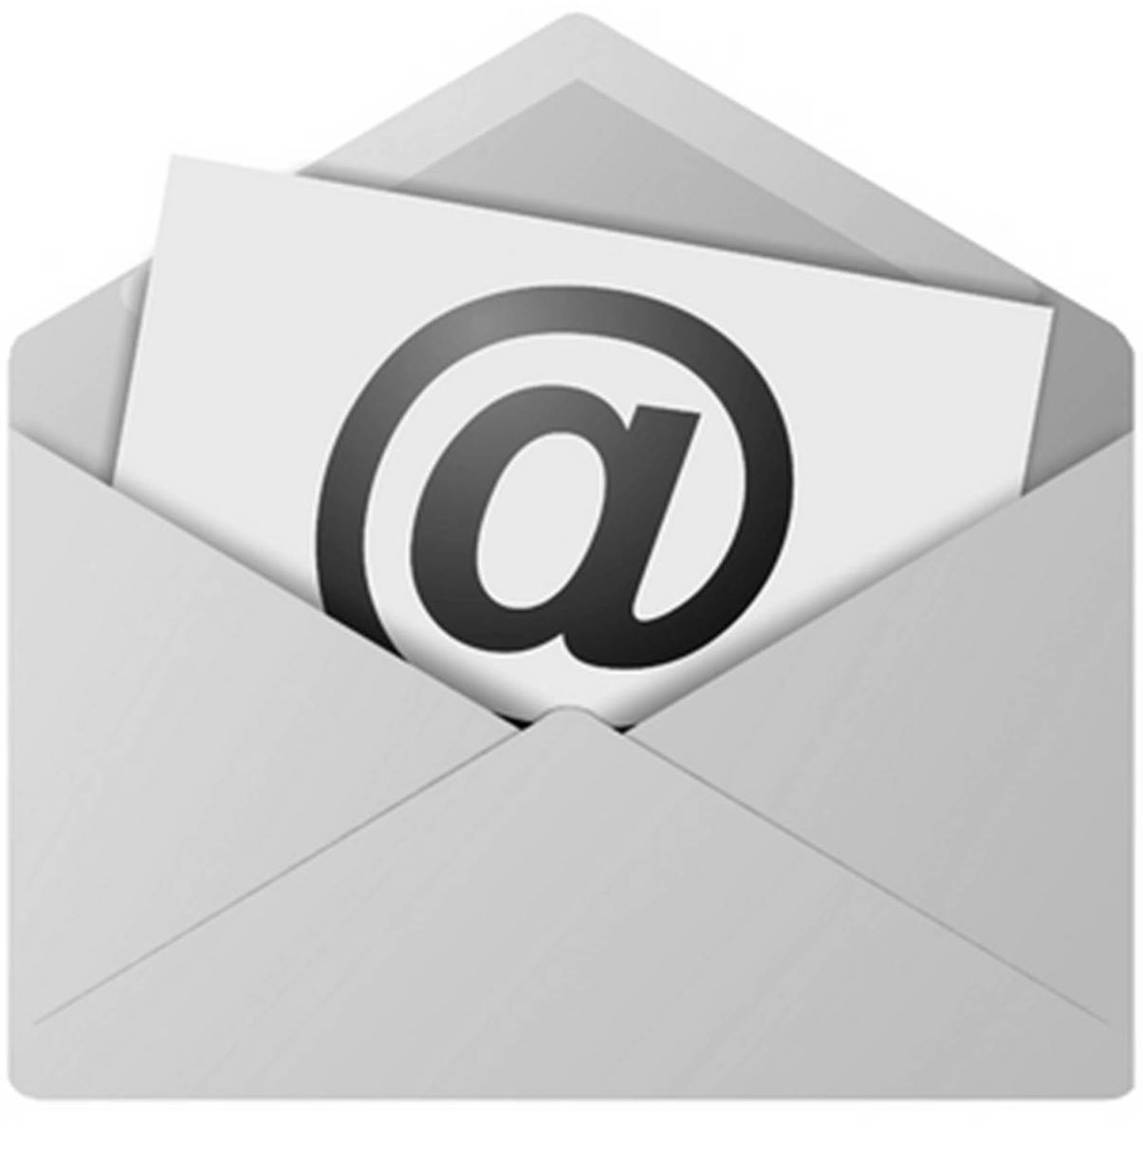 14 Email Contact Icon Images